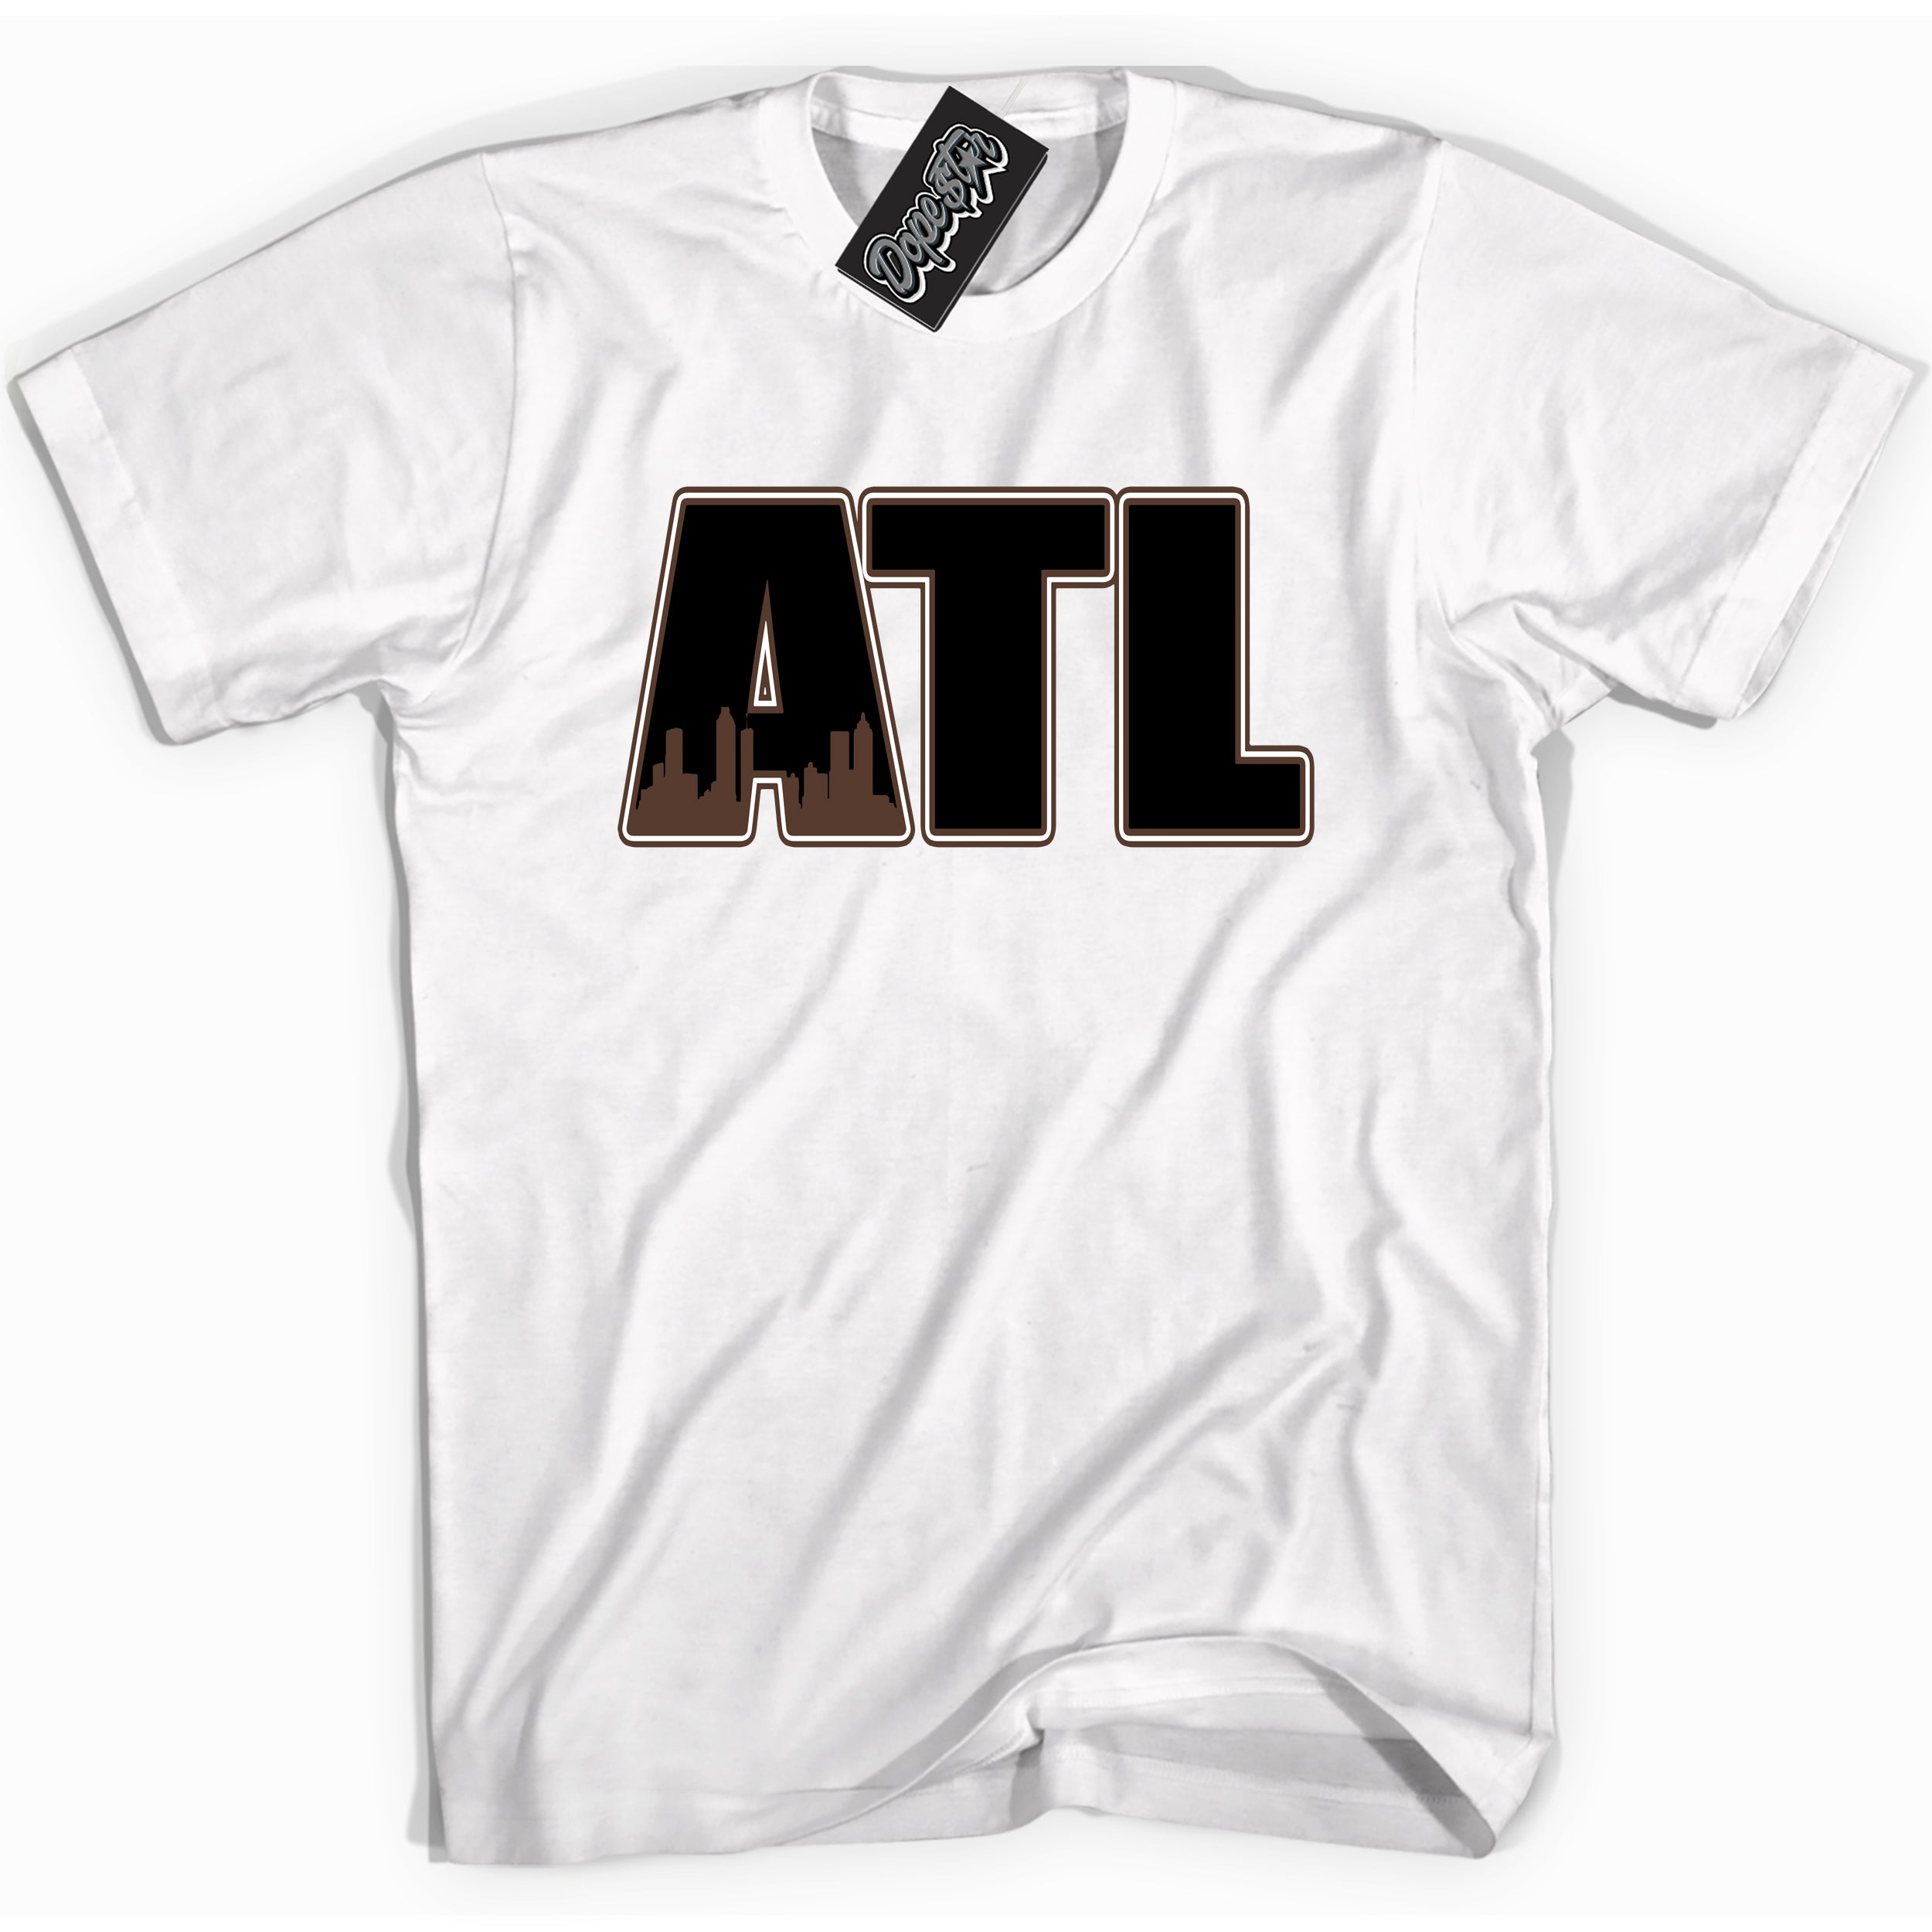 Cool White graphic tee with “ Atlanta ” design, that perfectly matches Palomino 1s sneakers 